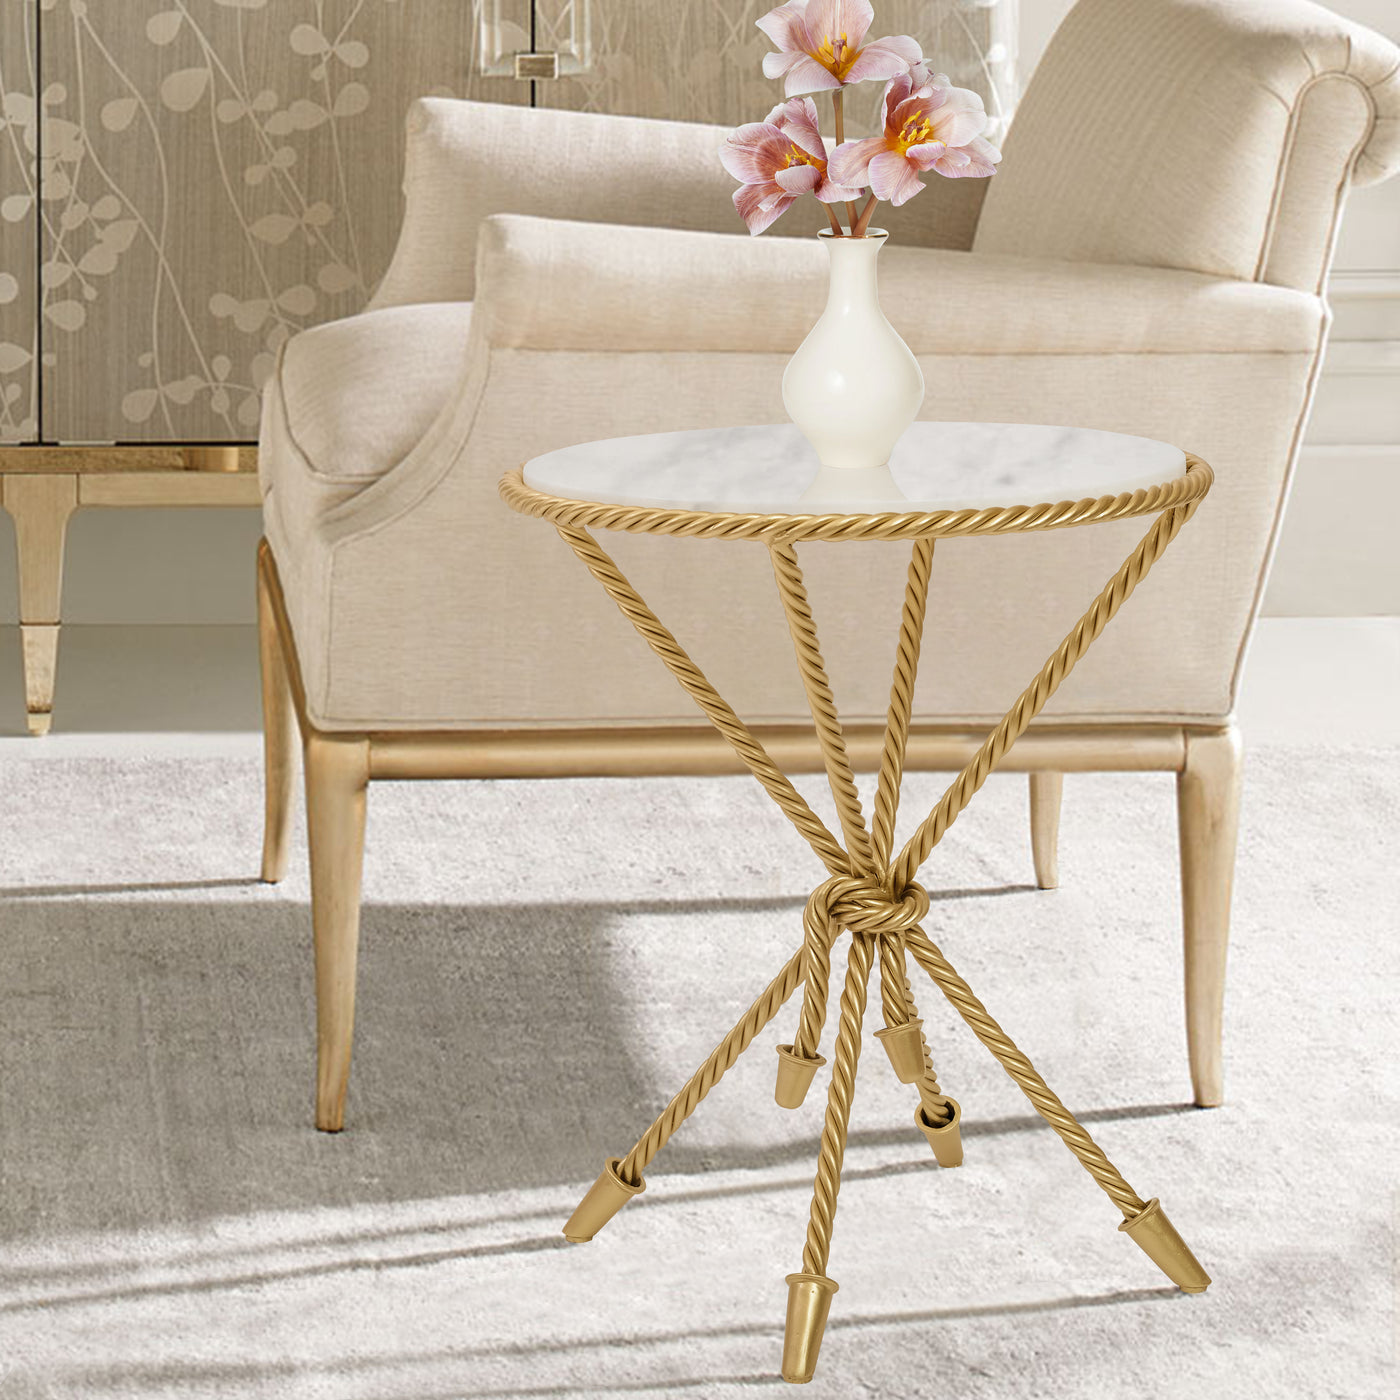 A unique golden accent table inspired by twisted rope sits beside a beige armchair